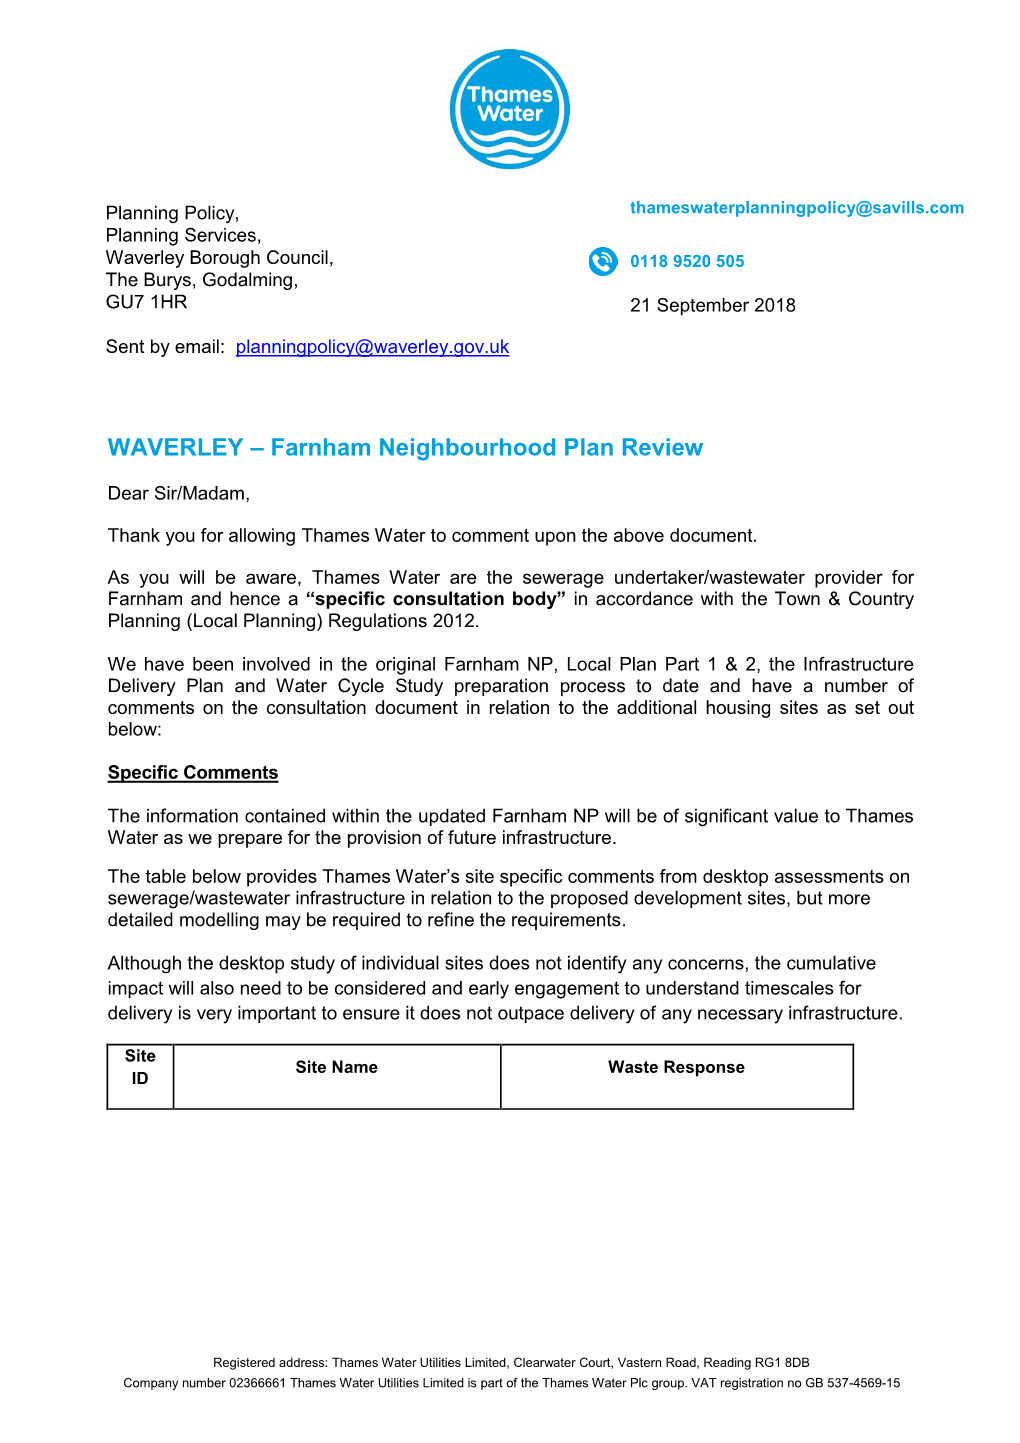 Thames Water to Comment Upon the Above Document